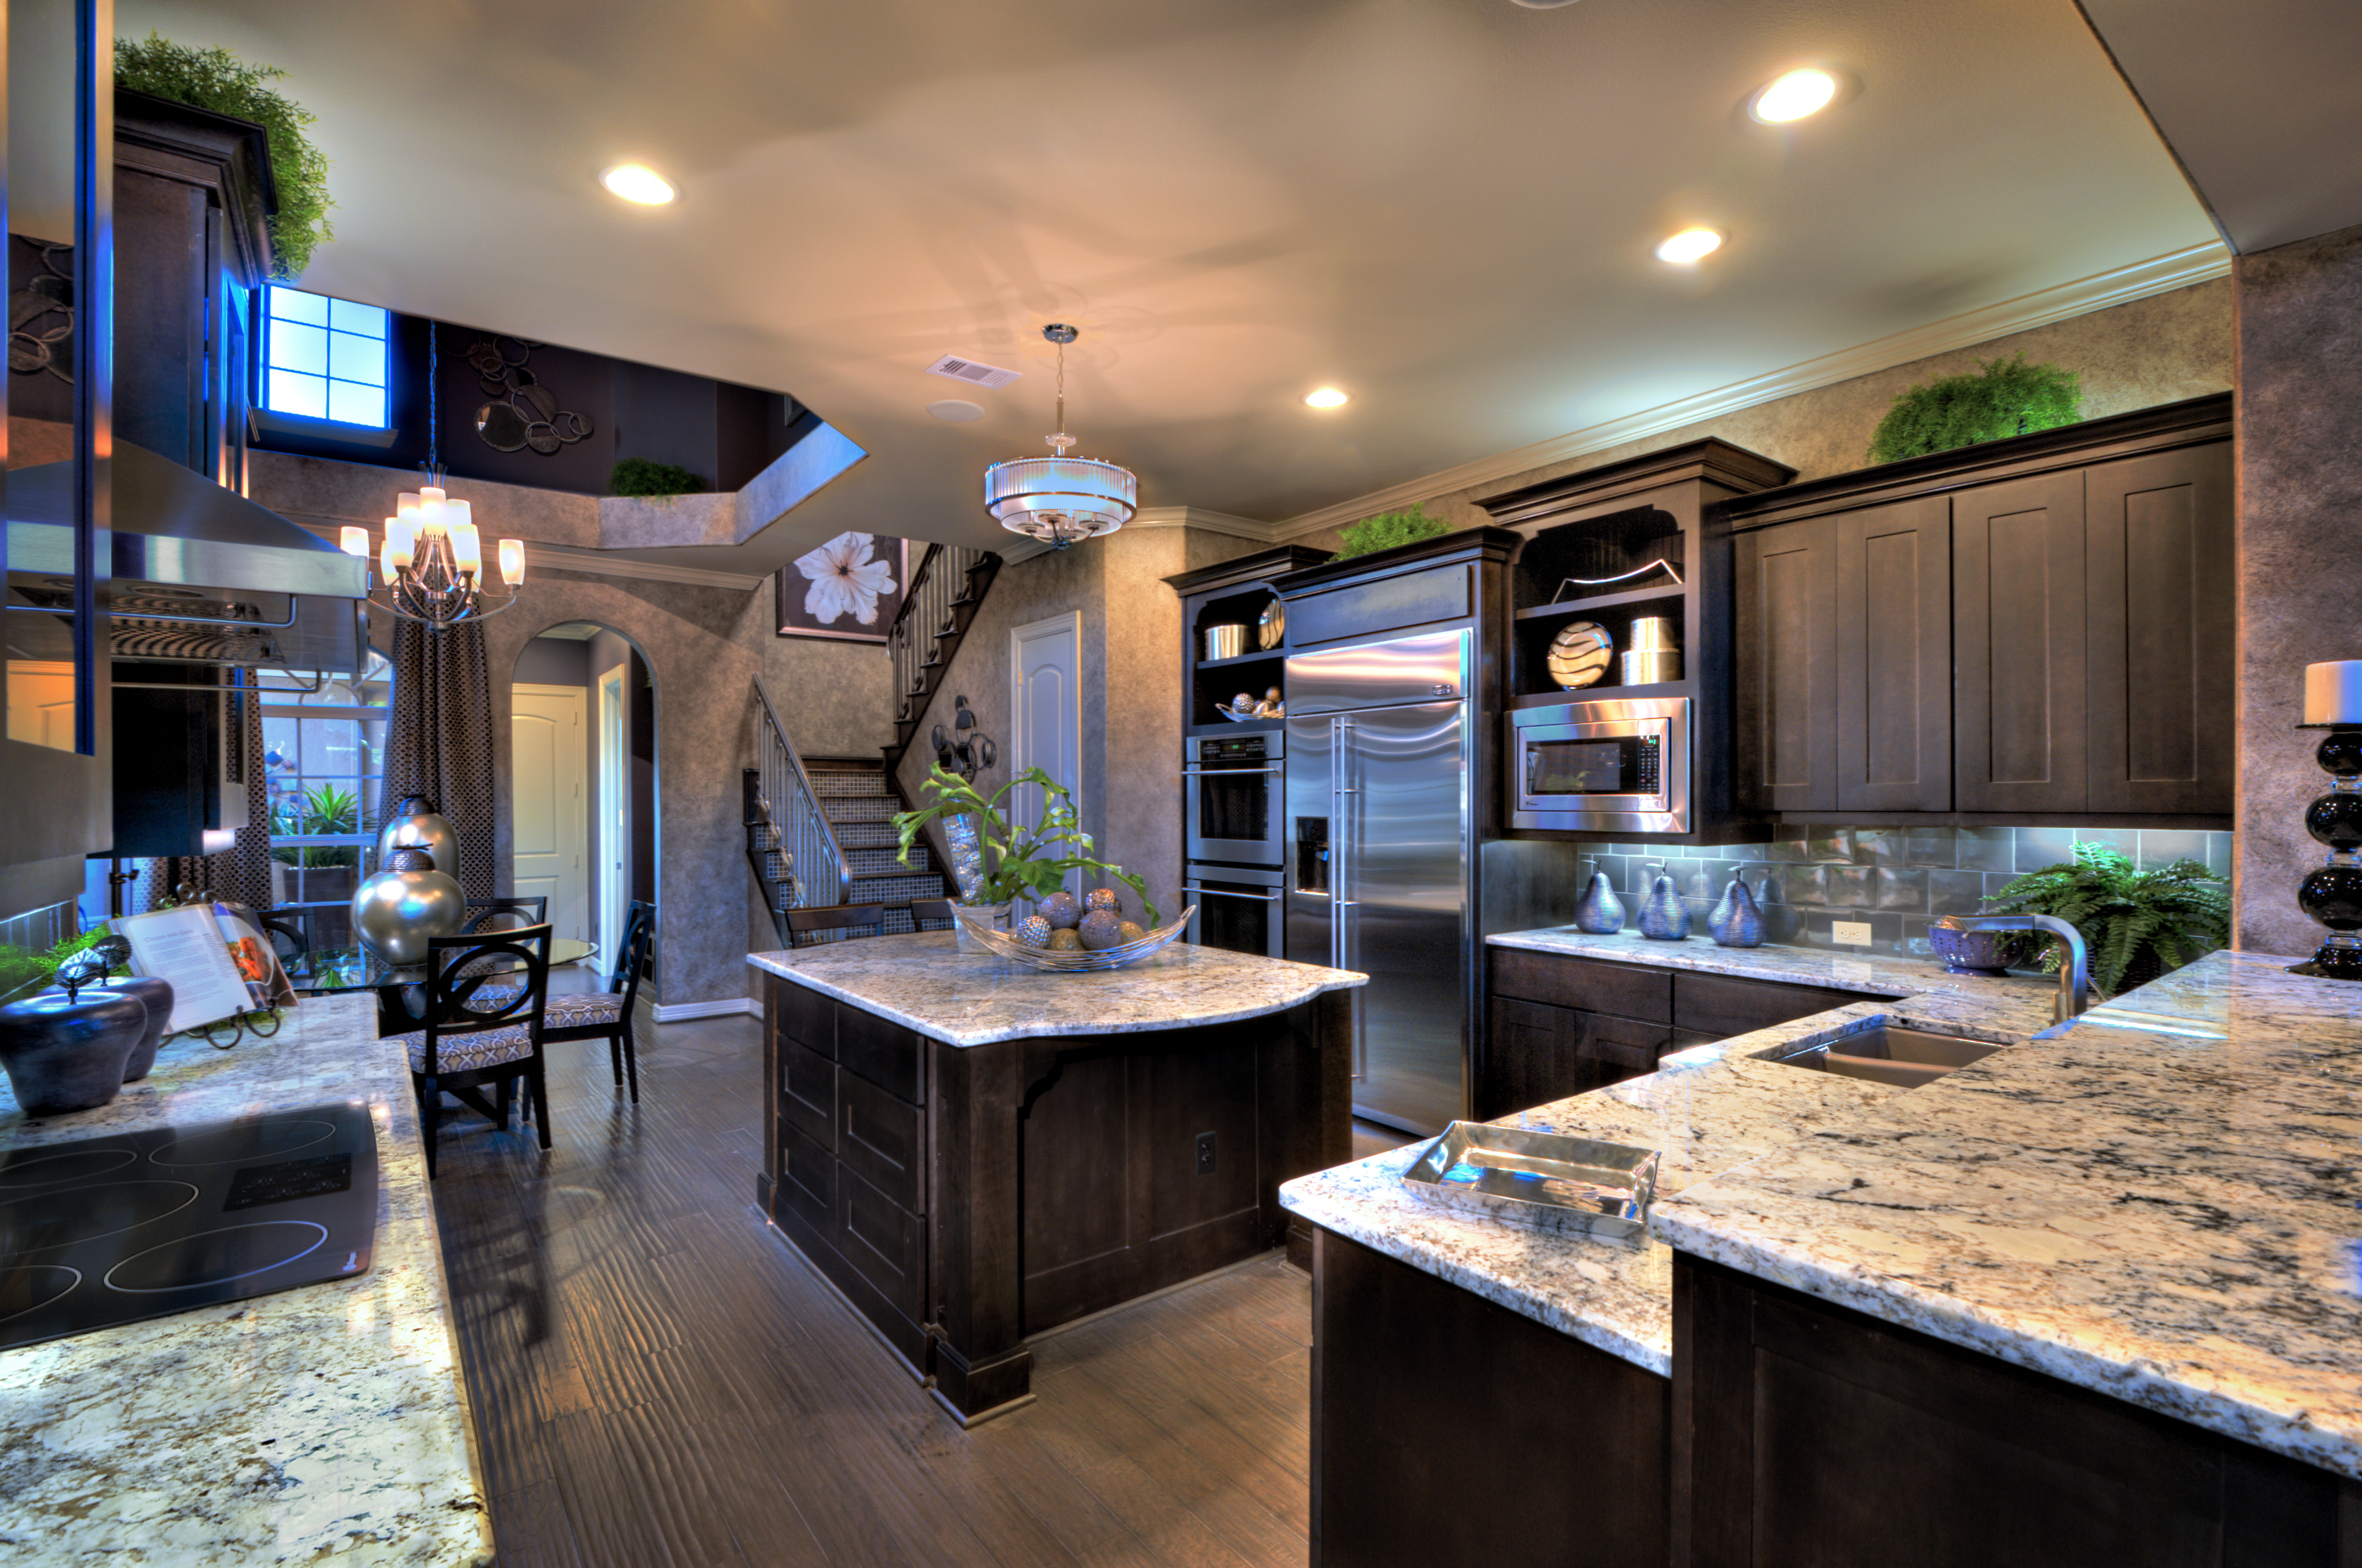 A look at the gourmet kitchen in the Positano. “It’s a great time to select your next home,” said Jim Ellison, vice president of sales and marketing for Taylor Morrison’s Houston division.